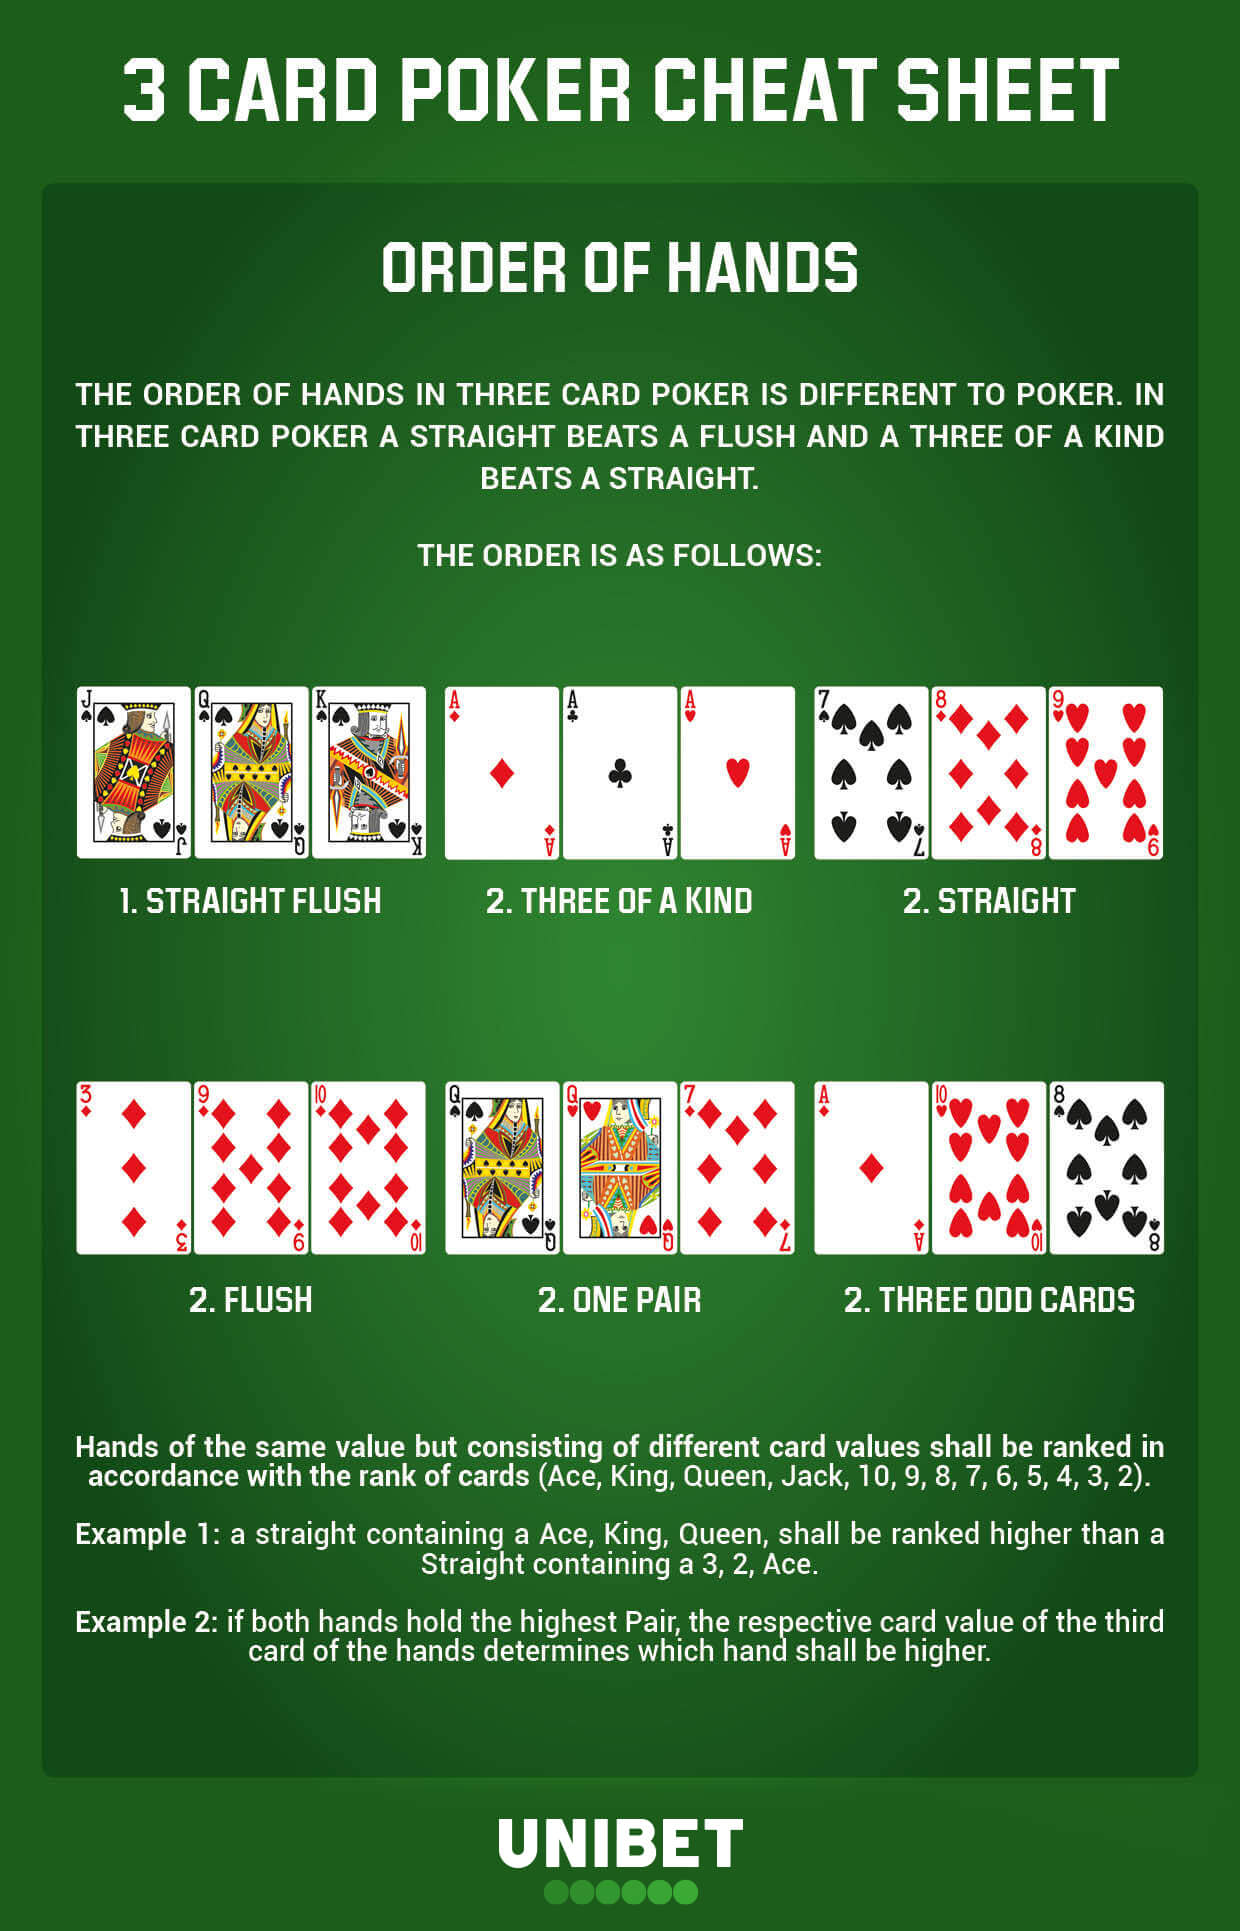 What's the best hand in Three Card Poker?